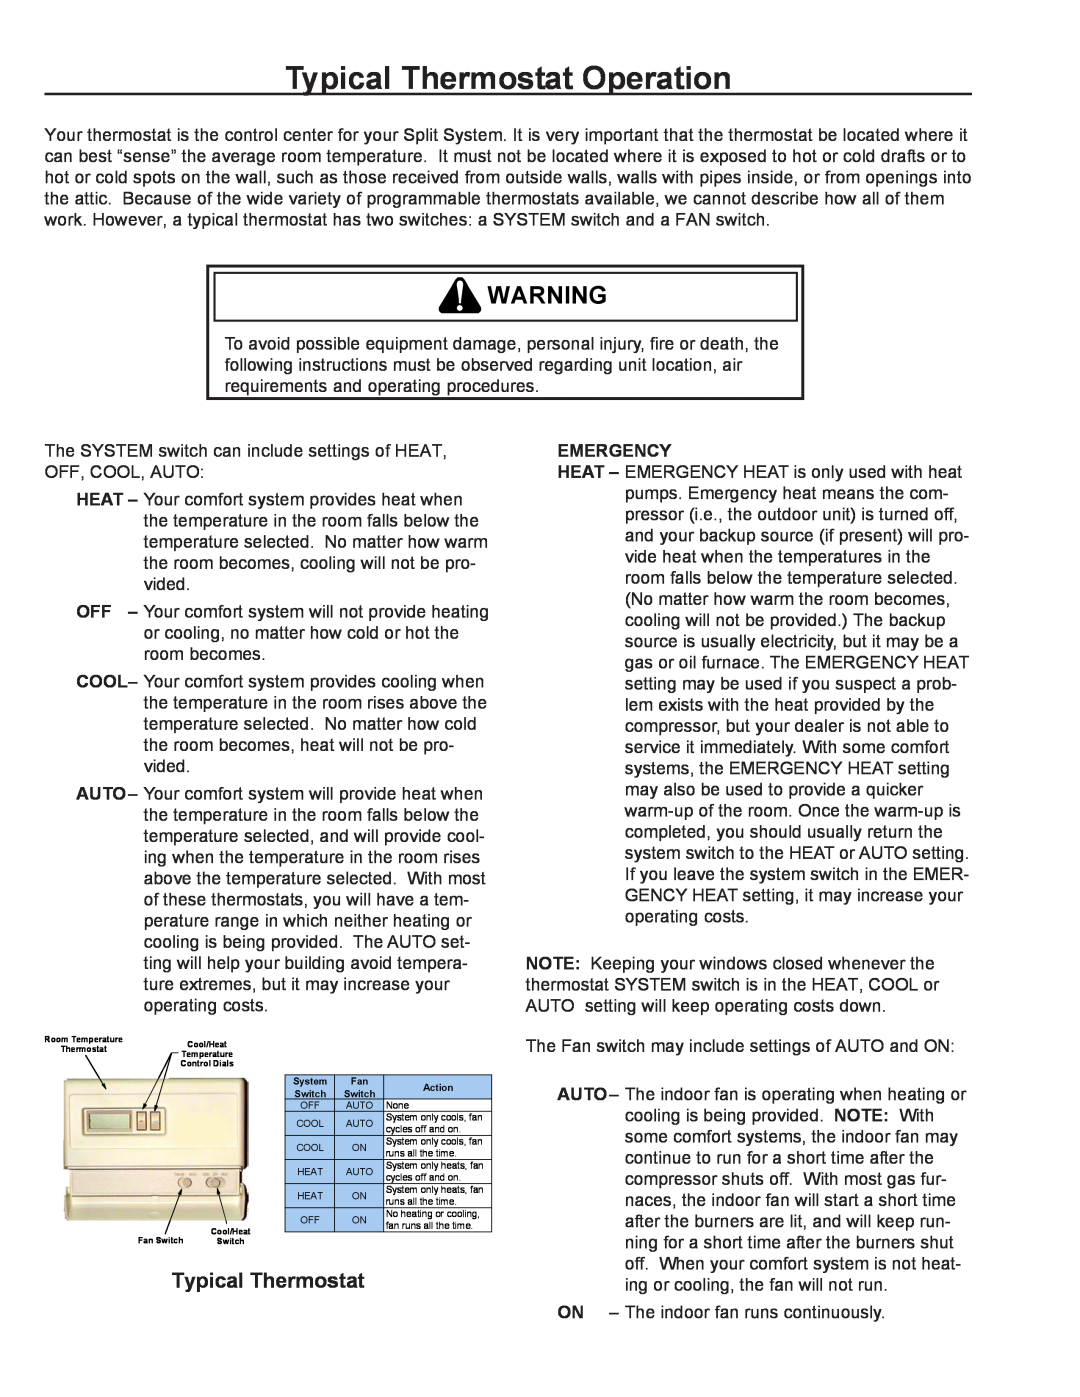 Amana REMOTE CONDENSING UNIT user manual Typical Thermostat Operation, Emergency 